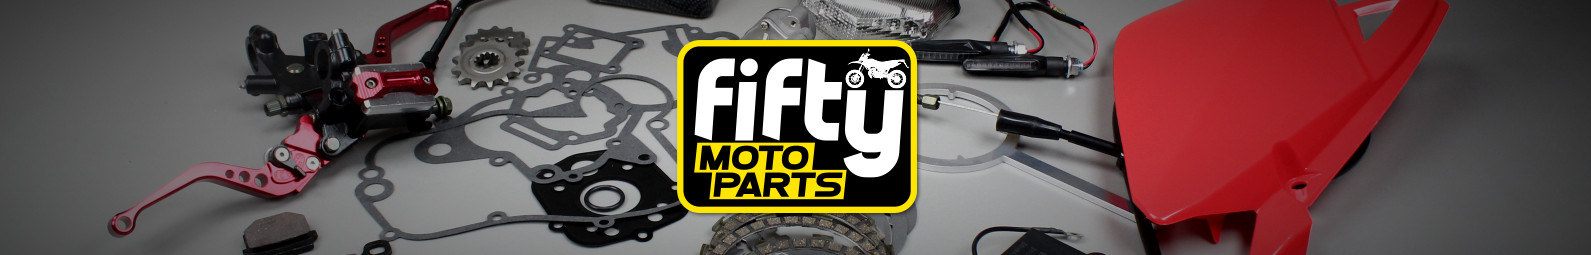 motorcycle scooter parts Fifty moto parts